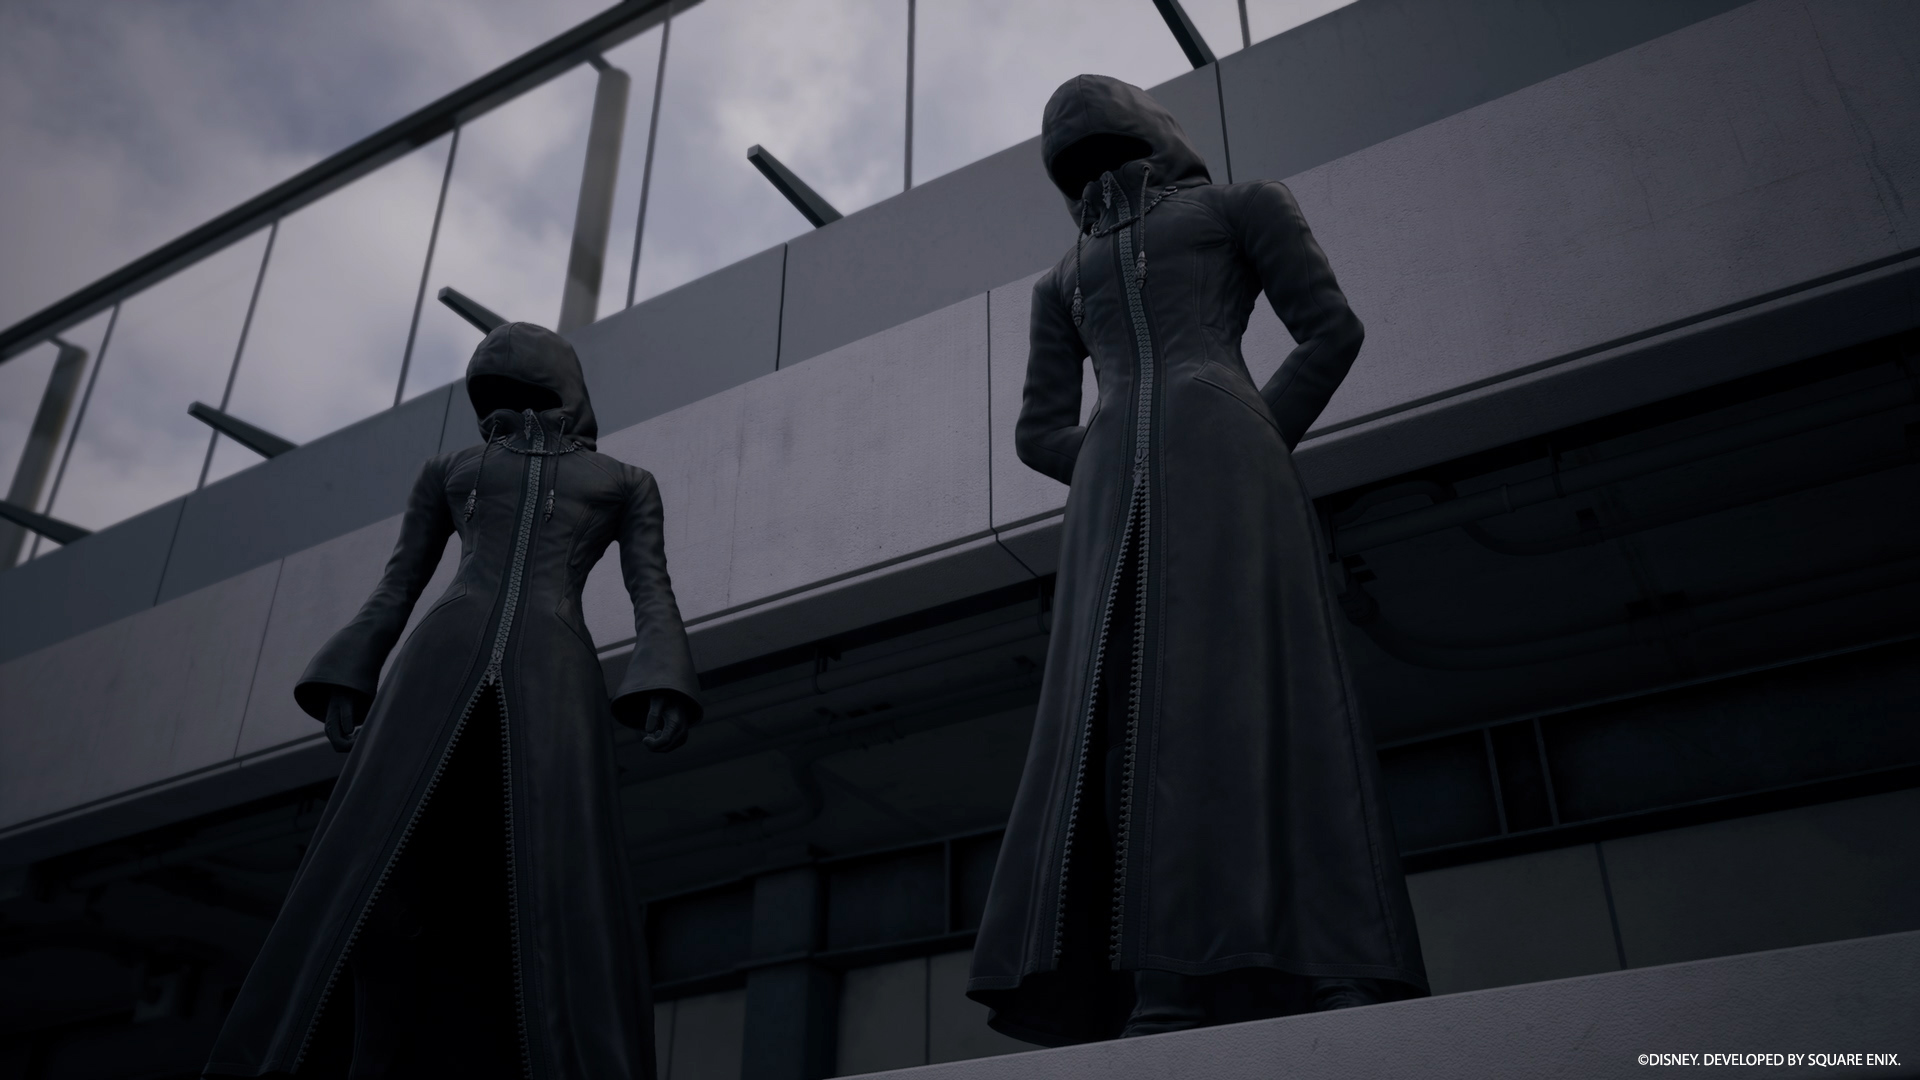 Black Coats, probably the Master of Masters and Luxu, in KINGDOM HEARTS IV